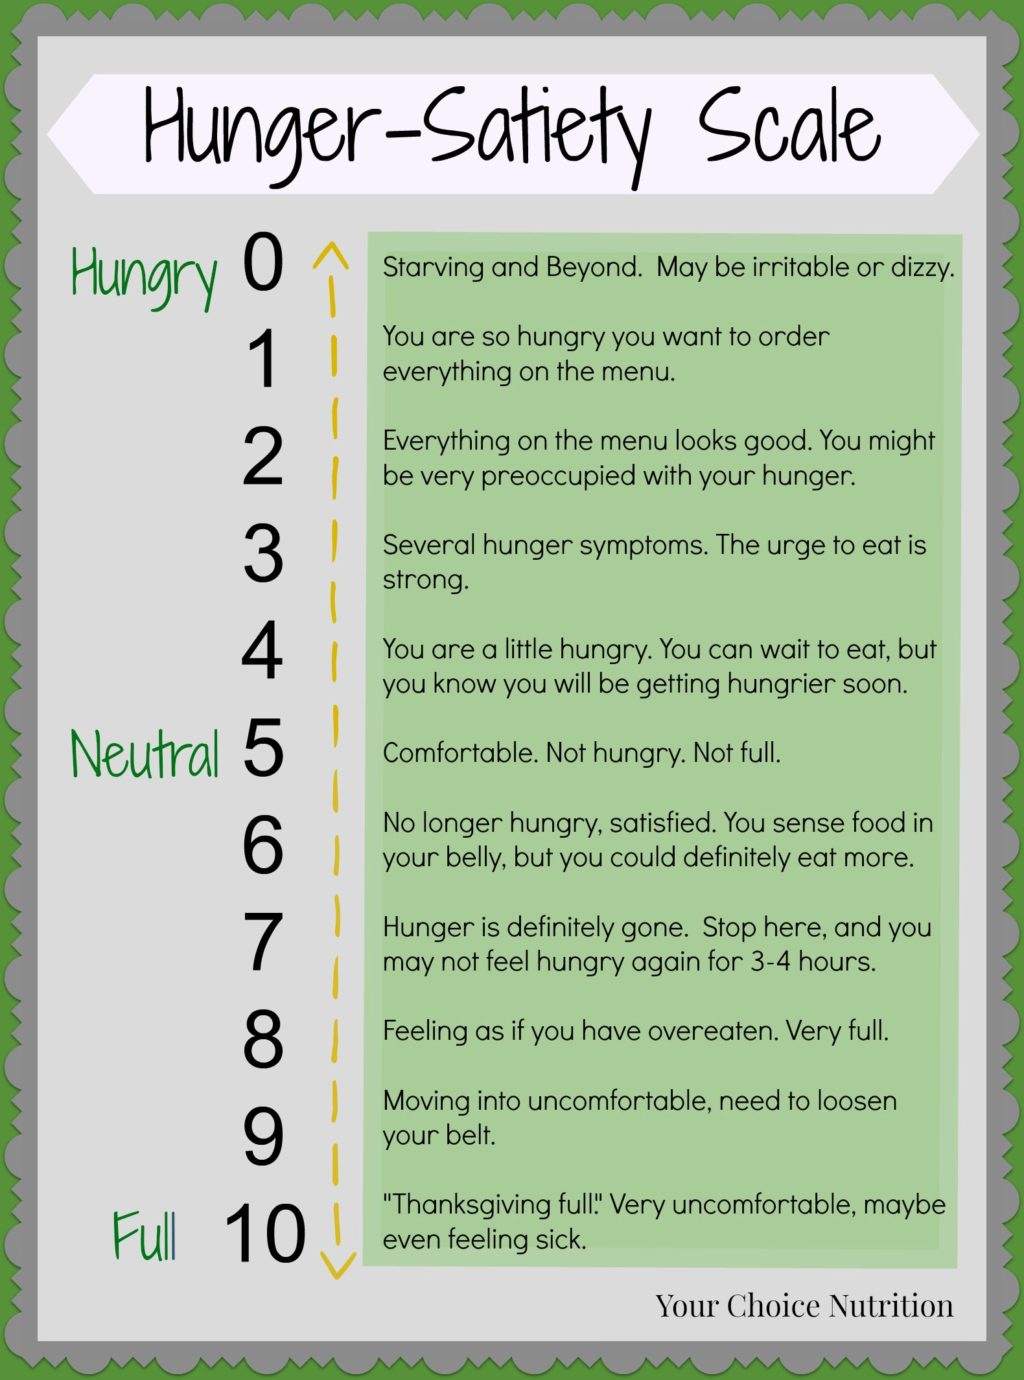 Hunger-Satiety Scale-2 - Your Choice Nutrition